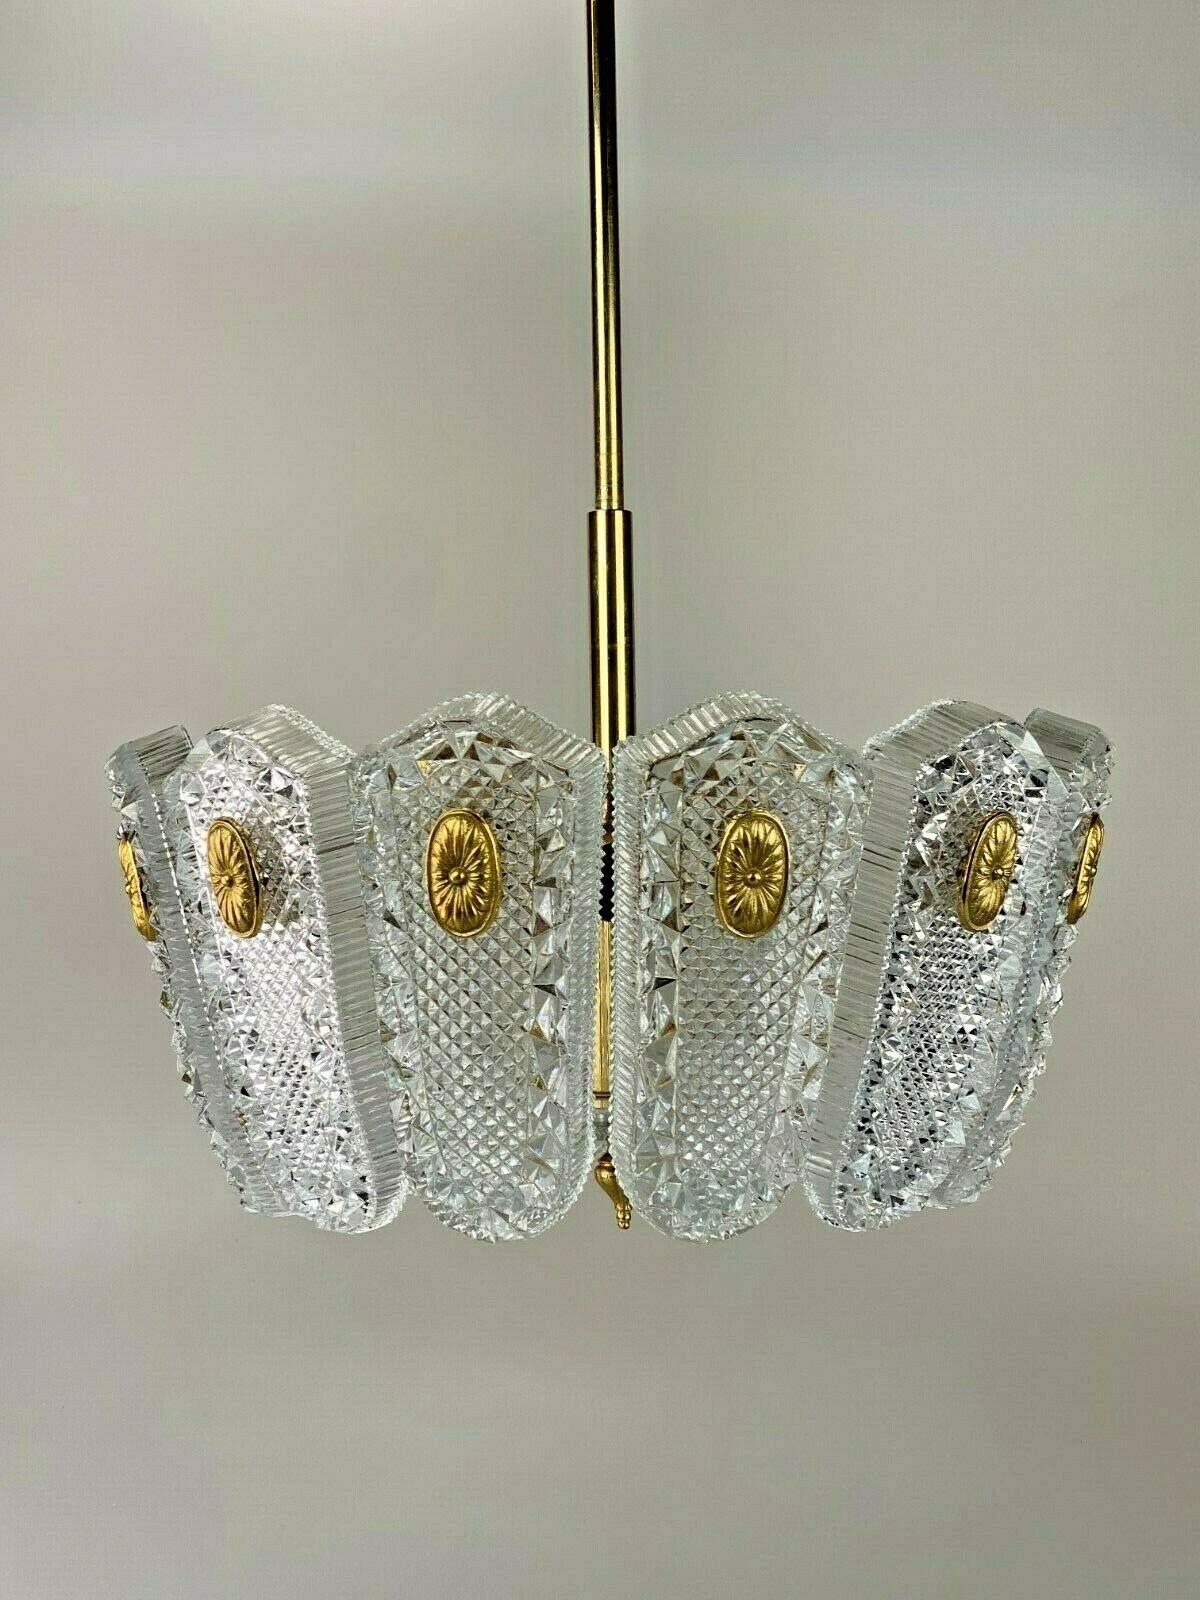 60s 70s Lamp light ceiling lamp chandelier chandelier Orrefors 60s.

Object: chandelier

Manufacturer: Orrefors

Condition: good

Age: around 1960-1970

Dimensions:

Diameter = 43cm
Height = 64cm

Other notes:

The pictures serve as